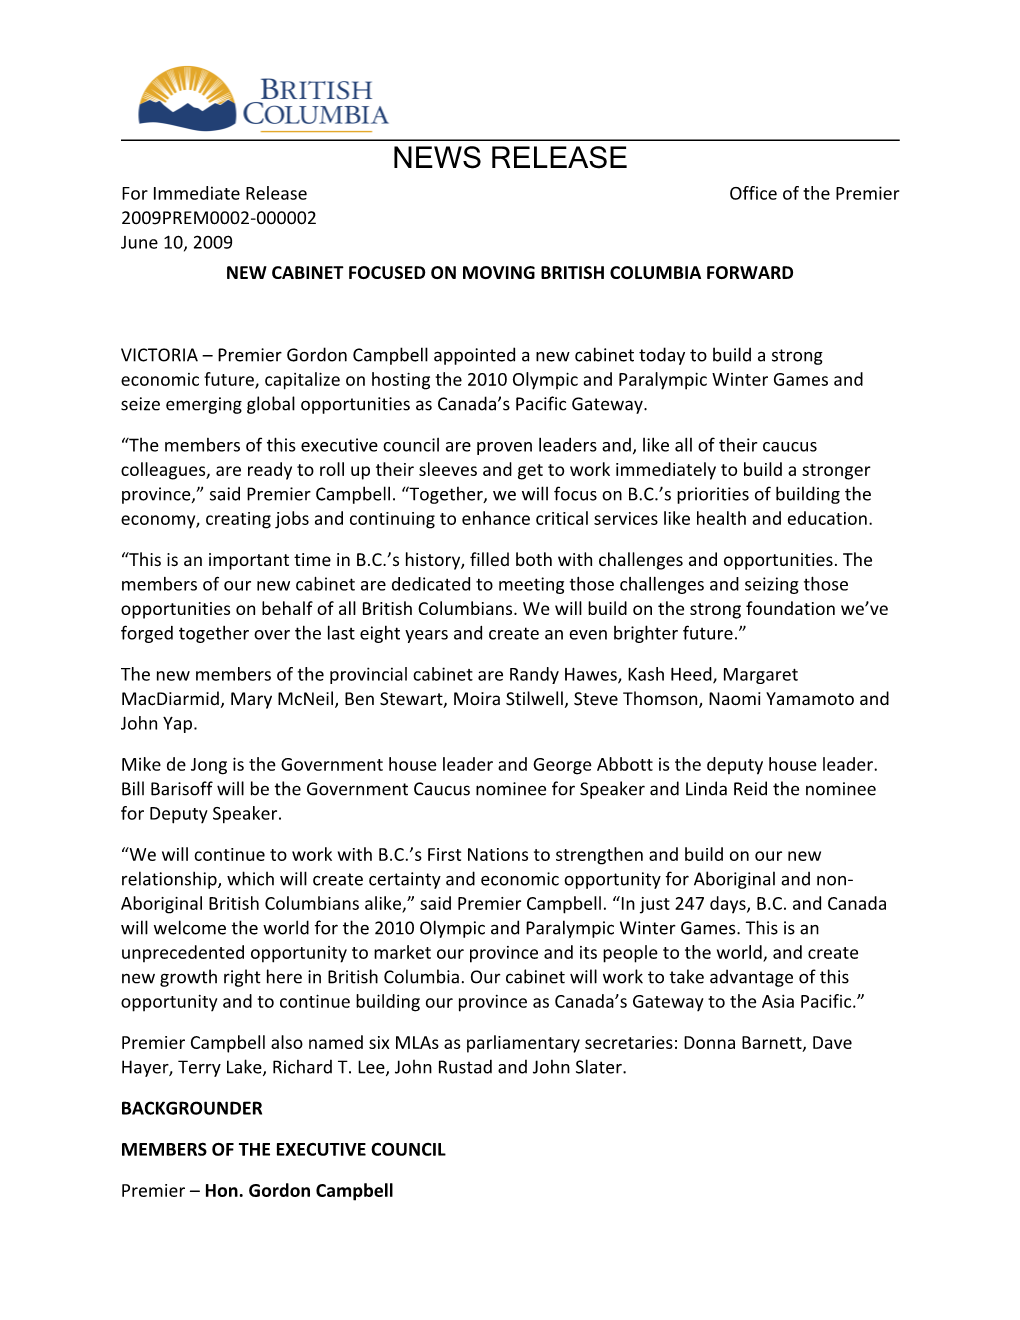 NEWS RELEASE for Immediate Release Office of the Premier 2009PREM0002-000002 June 10, 2009 NEW CABINET FOCUSED on MOVING BRITISH COLUMBIA FORWARD